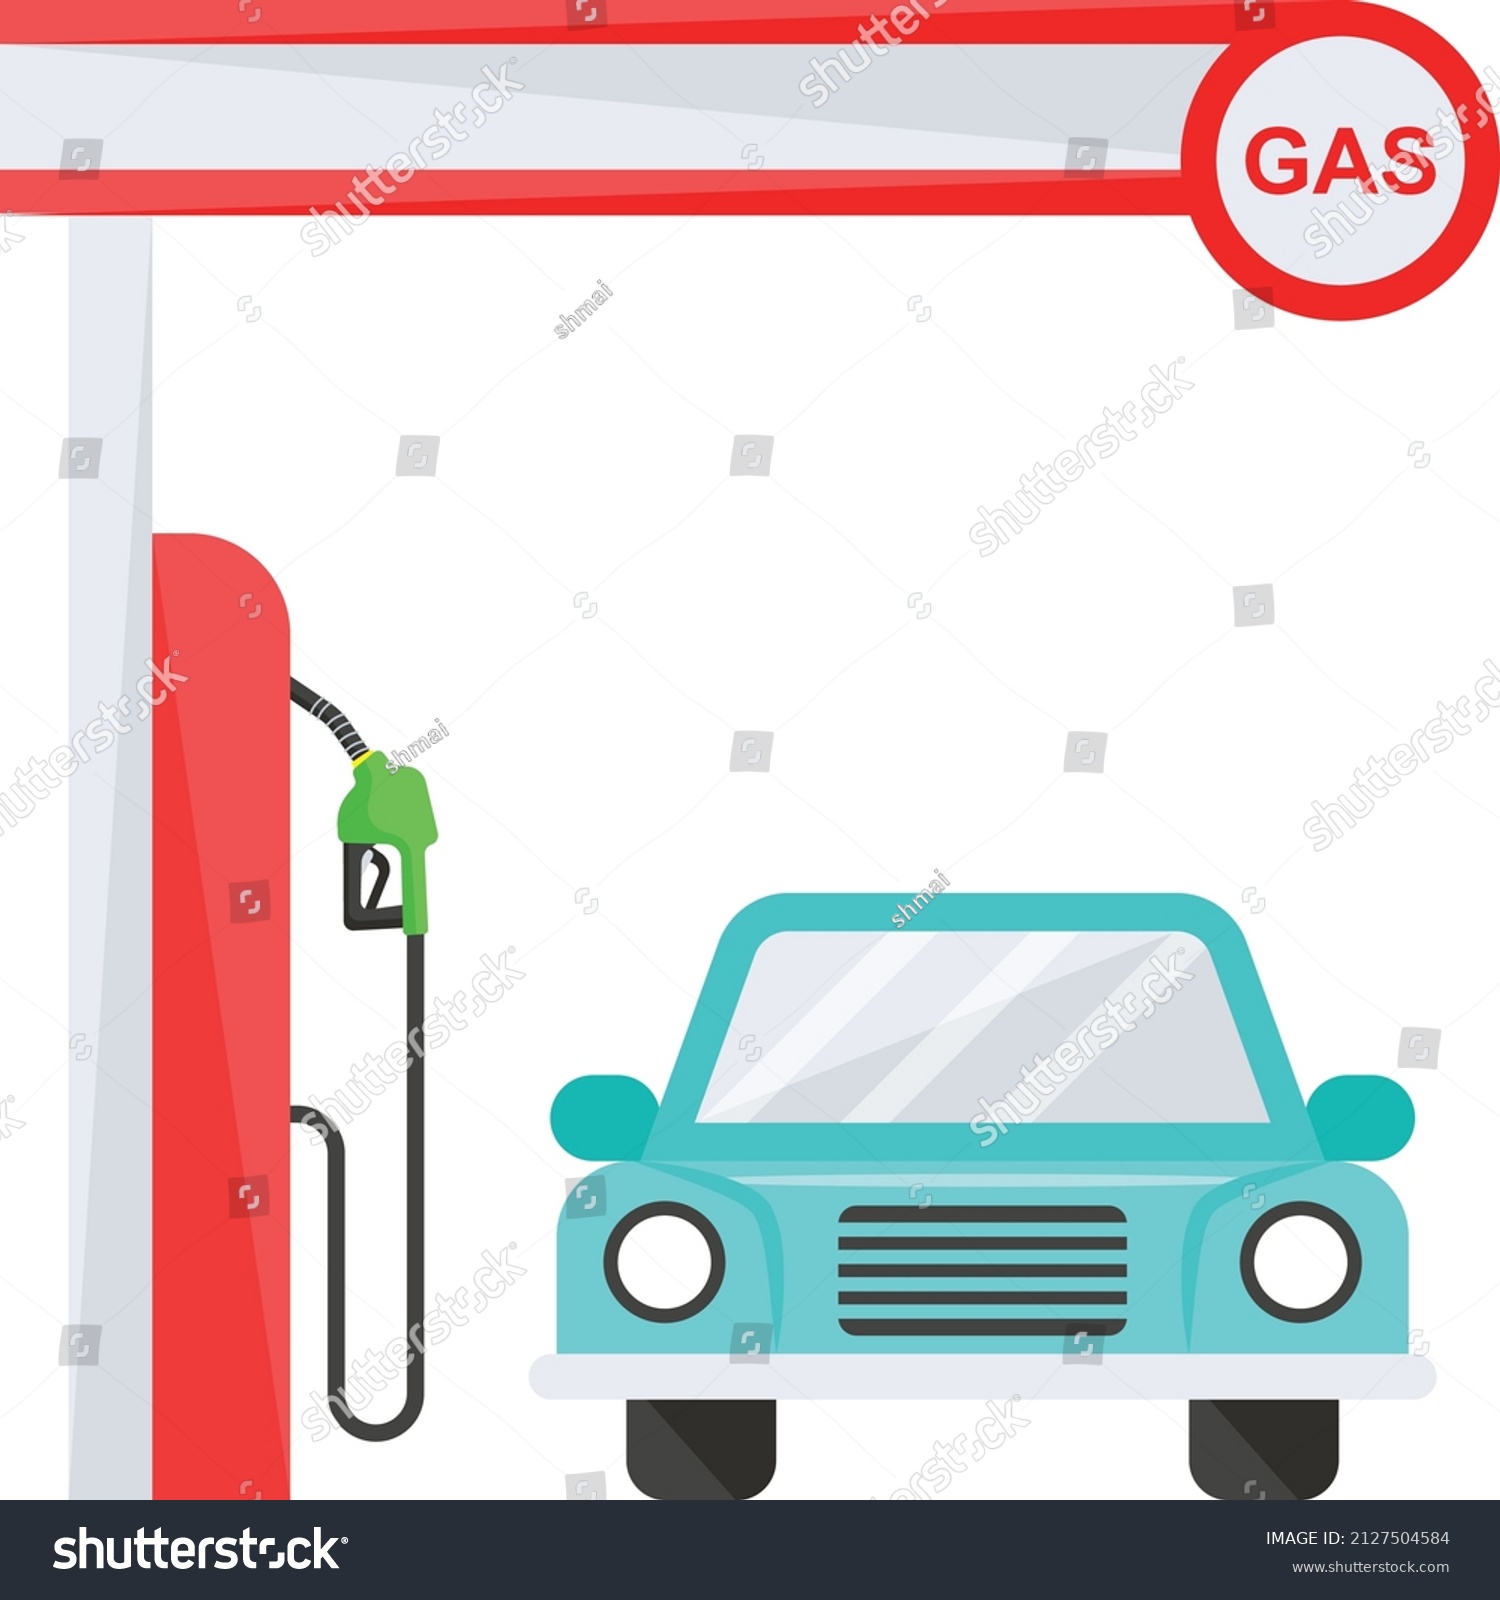 SVG of petrol bowsers with vehicle Front View Concept, gasoline pump Vector Icon Design, Oil and Gas industry Symbol, Petroleum  and gasoline Sign, Service and supply stock illustration svg